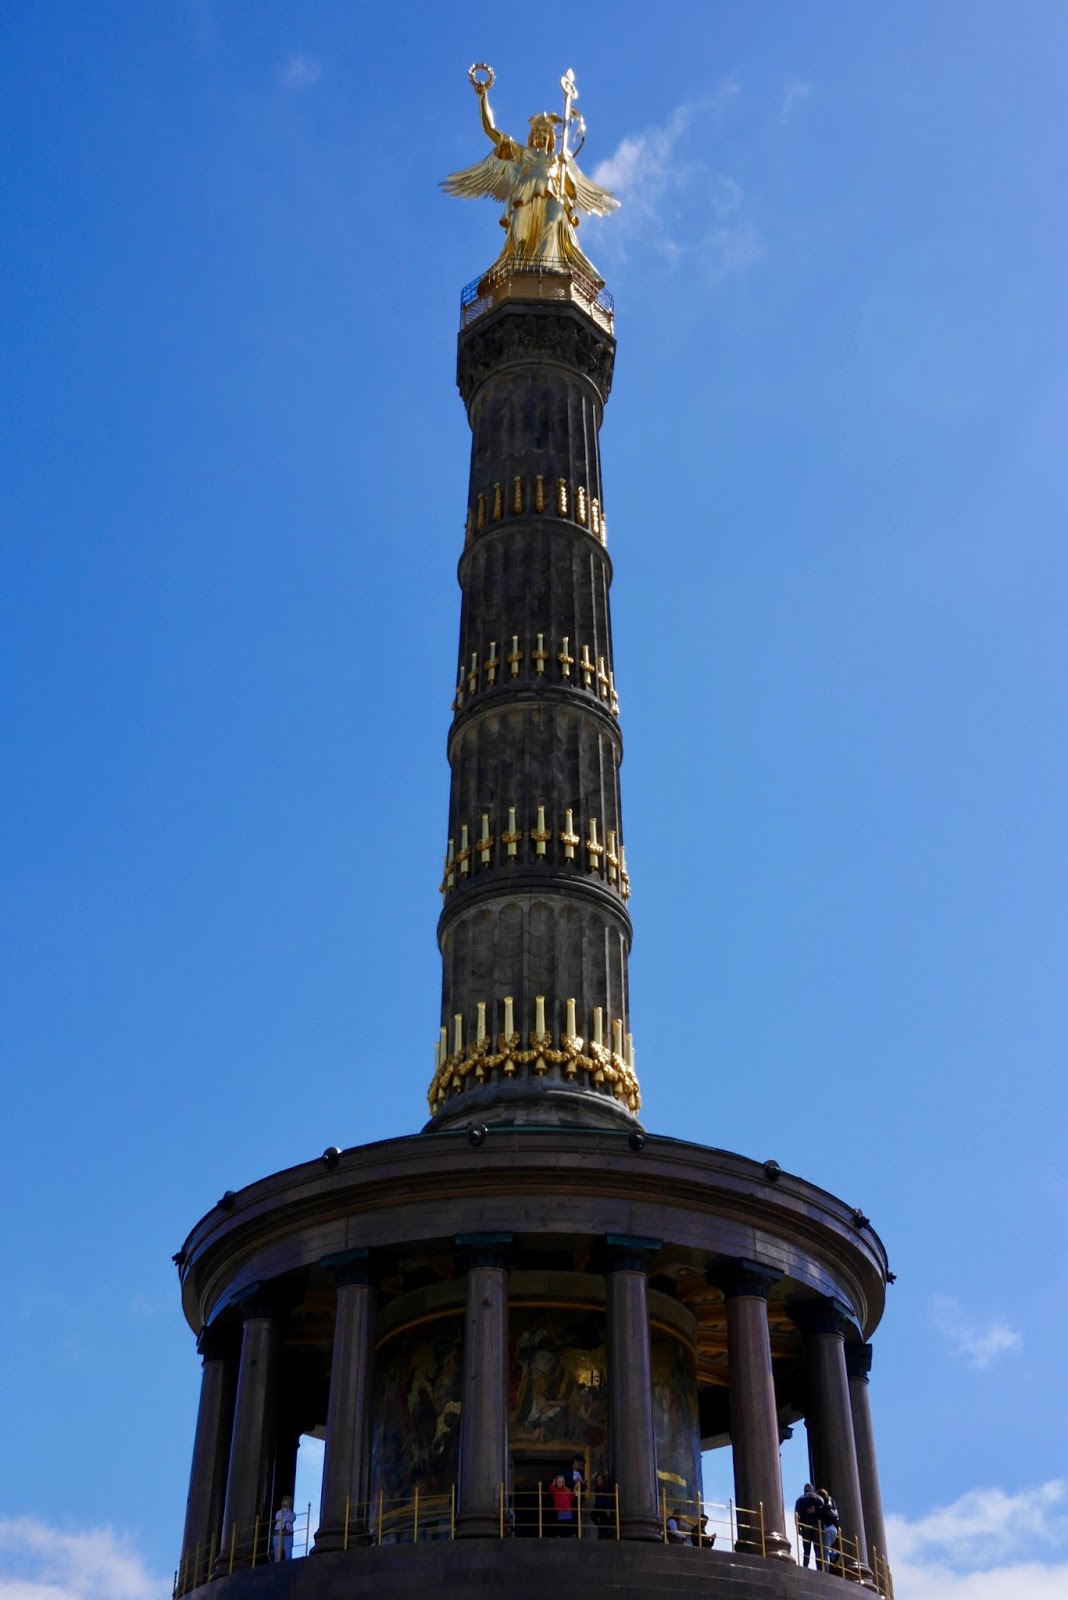 Victory Column towering up into a blue sky, by www.CalMcTravels.com. Cal McTravels